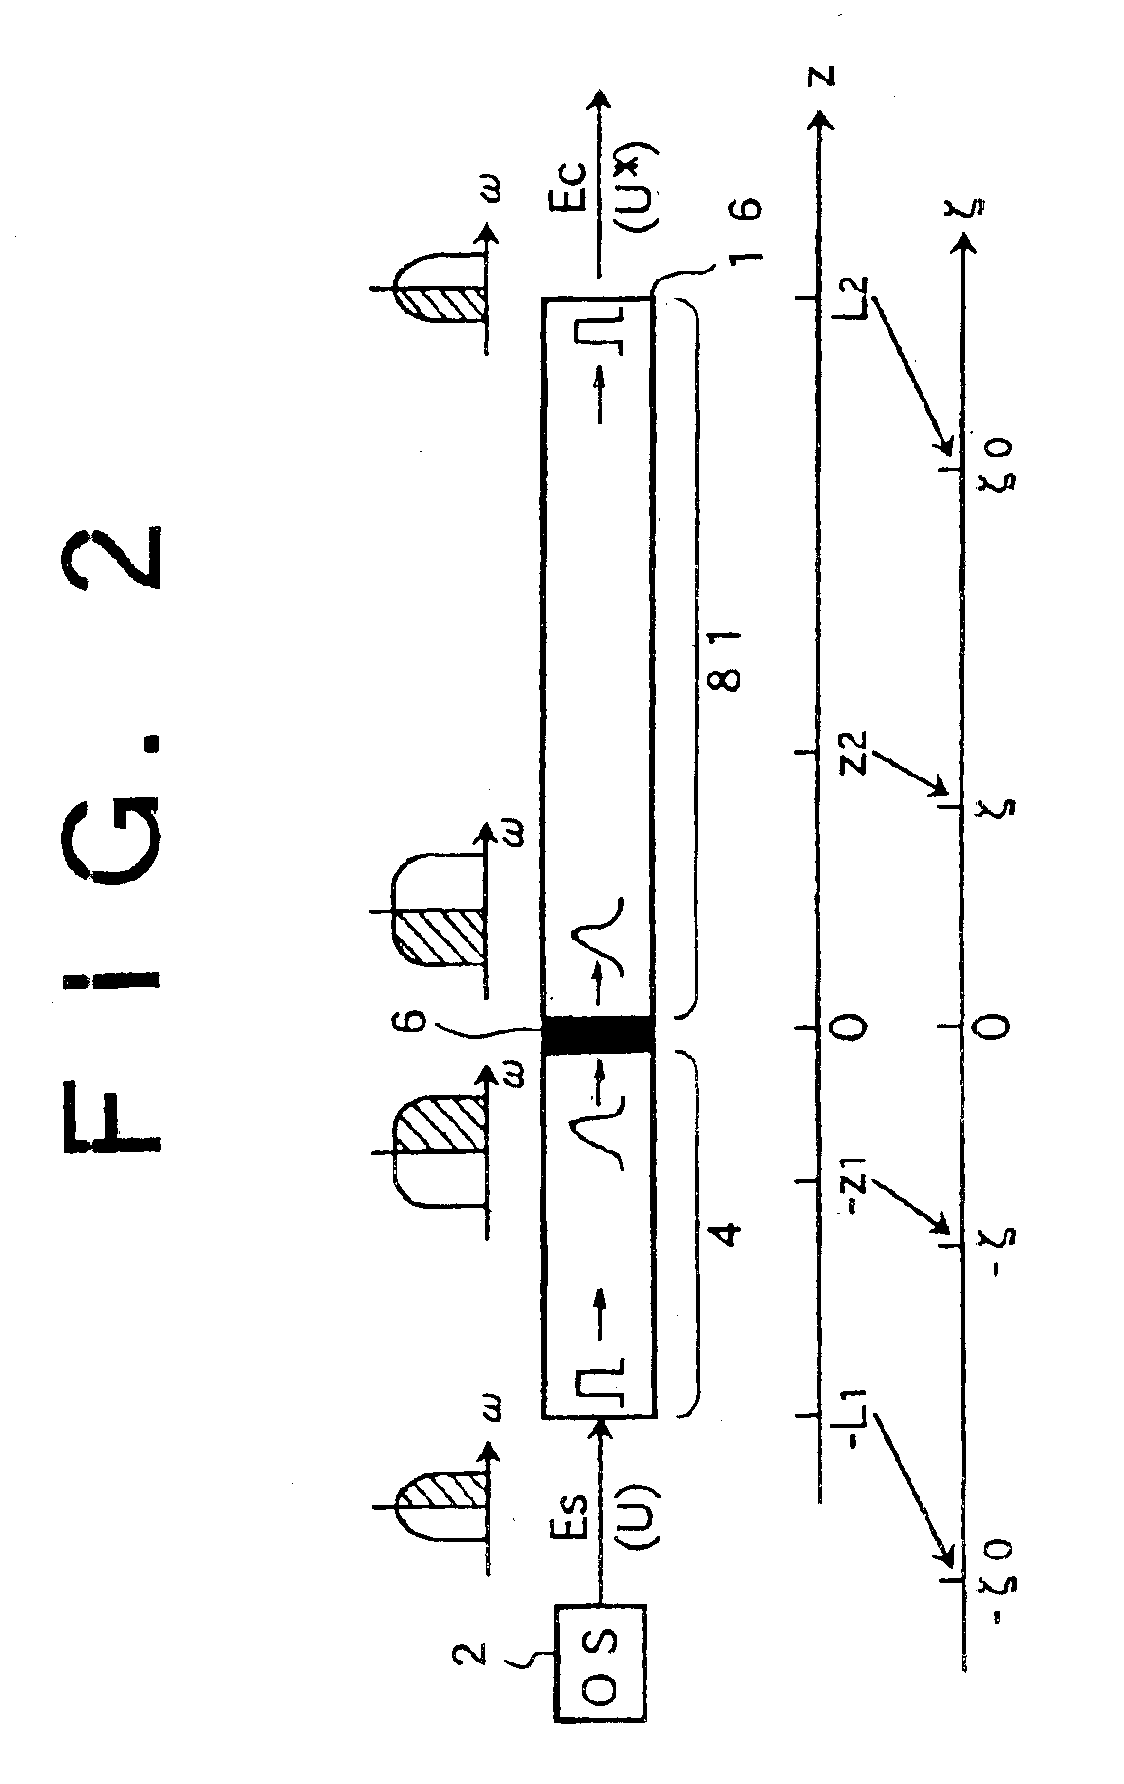 Optical fiber communication system using optical phase conjugation as well as apparatus applicable to the system and method of producing the same